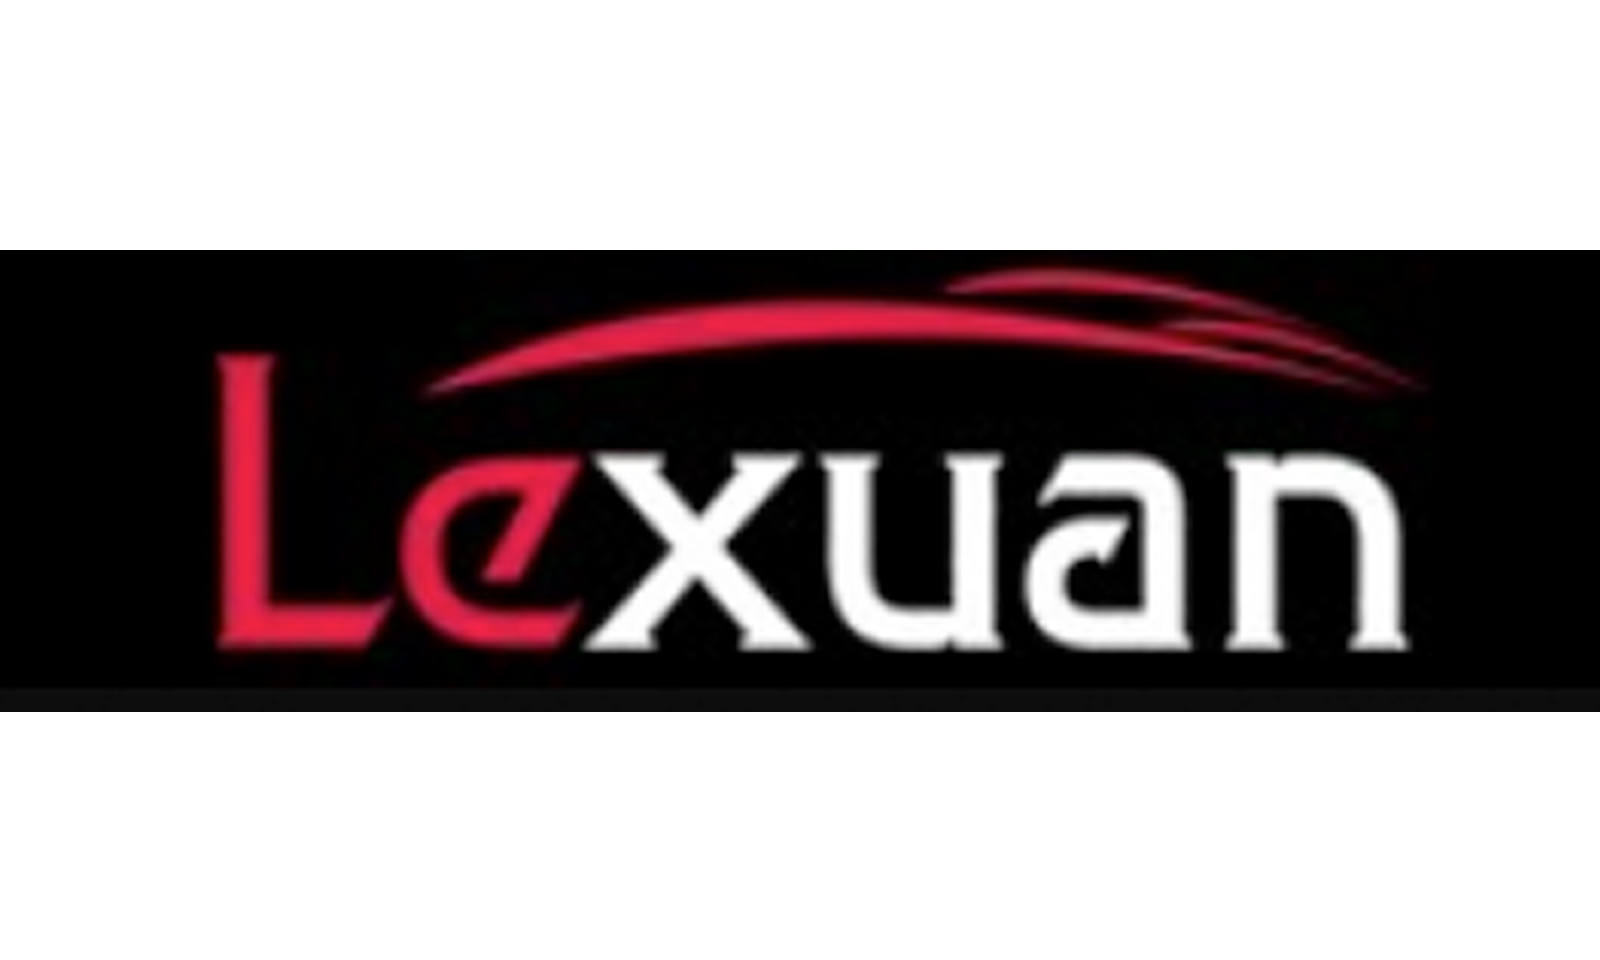 Lexuan Brings 20 Years of Experience to Sex Toy Production